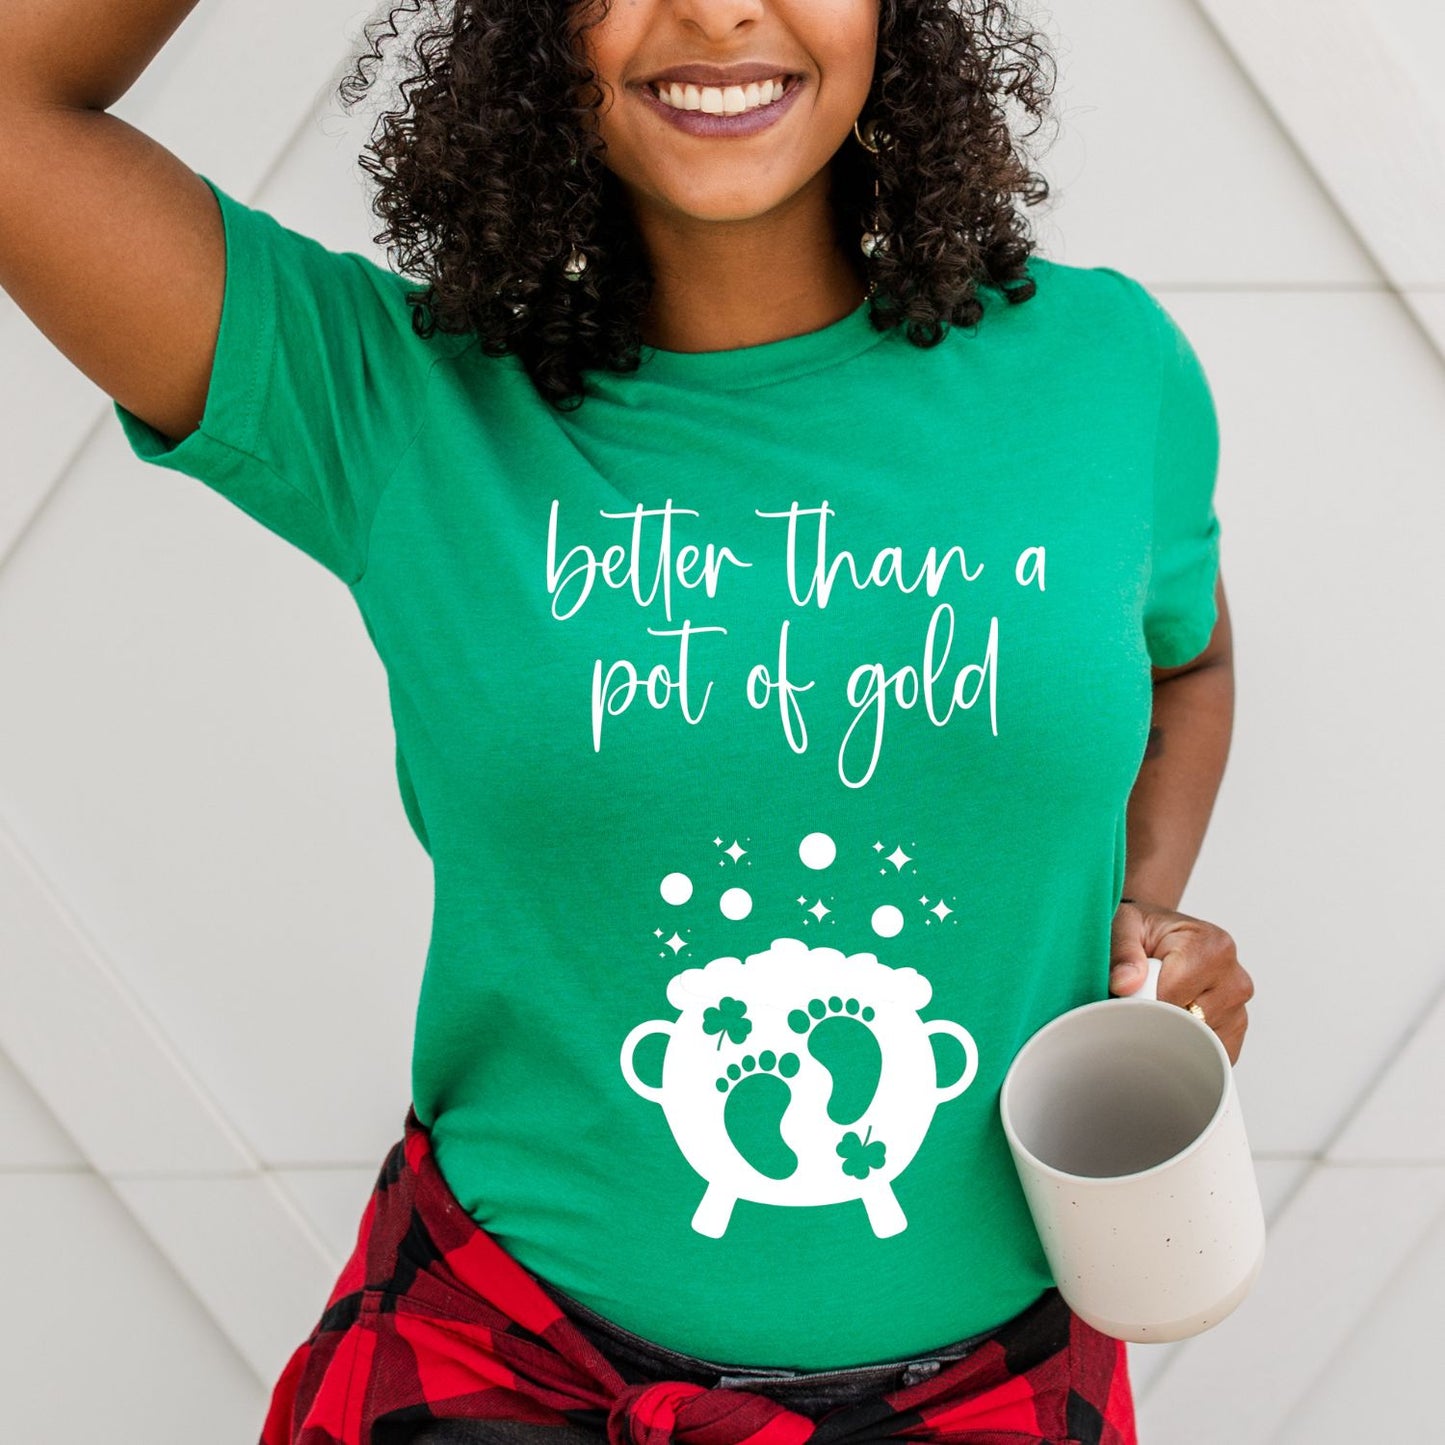 Better Than a Pot of Gold - St. Paddy's Day - Pregnancy Announcement Shirt